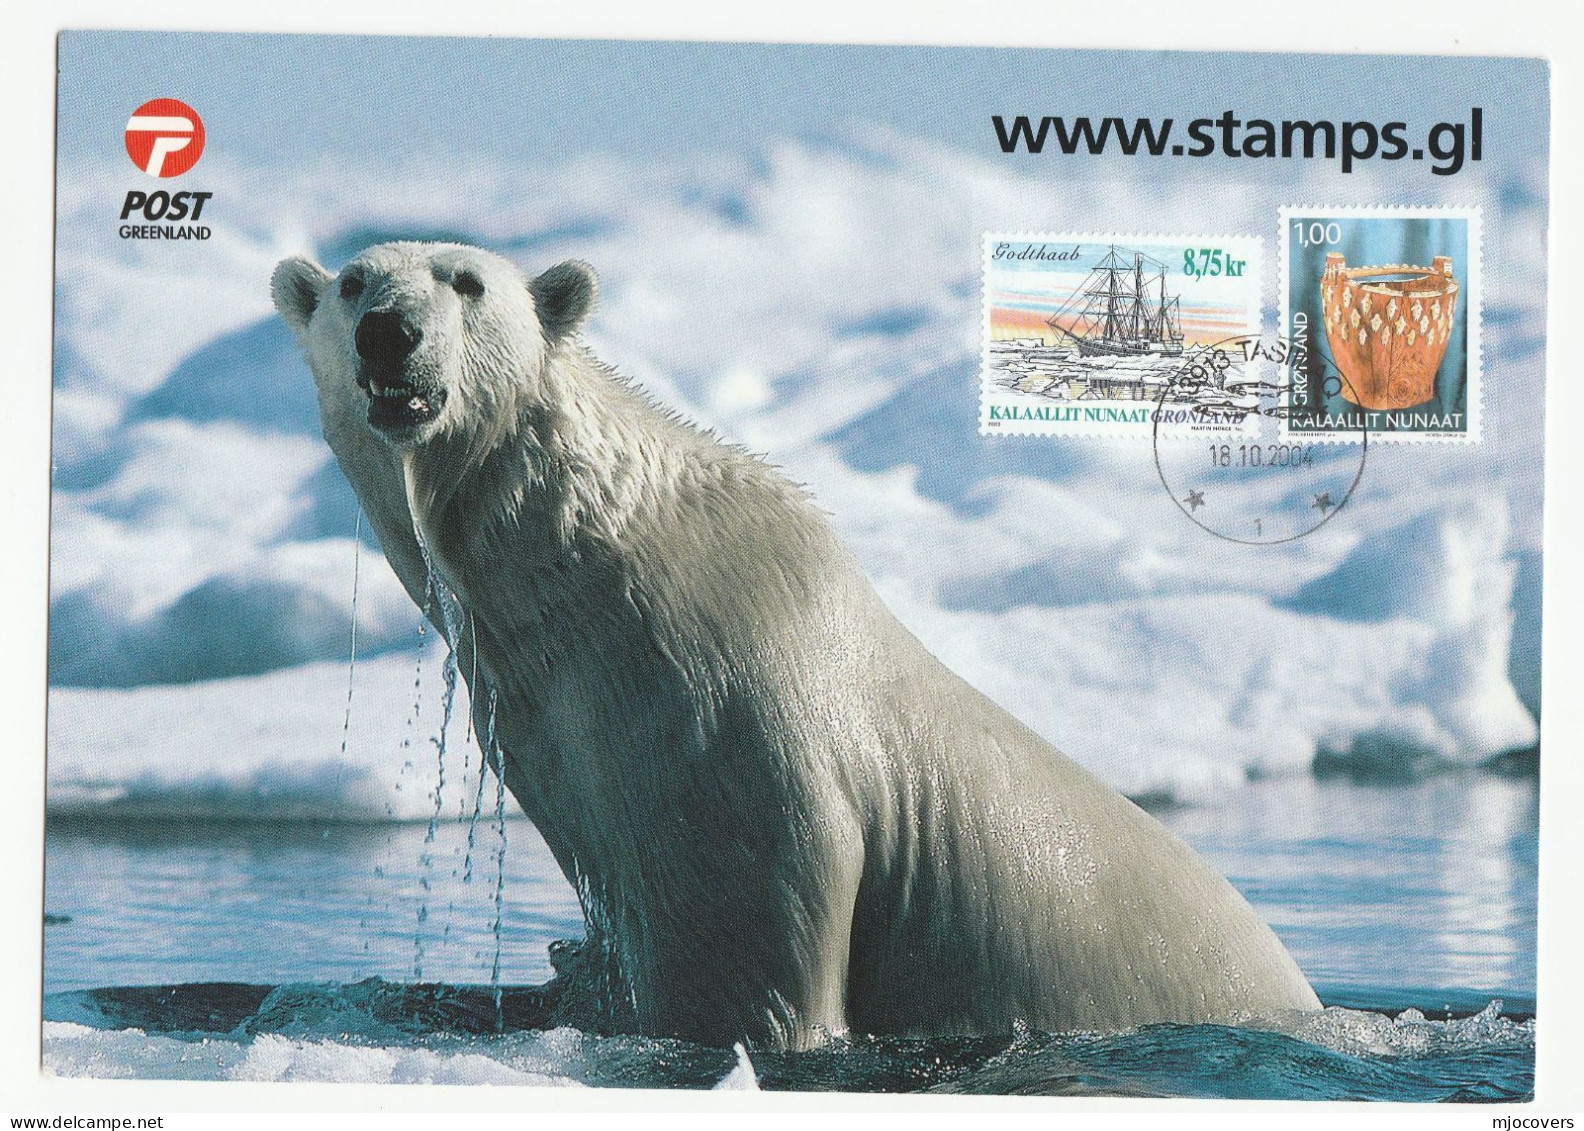 POLAR BEAR Tasiilaq GREENLAND  2004 Special EVENT Card Multi Stamps  Postcard Cover Sailing Ship - Lettres & Documents